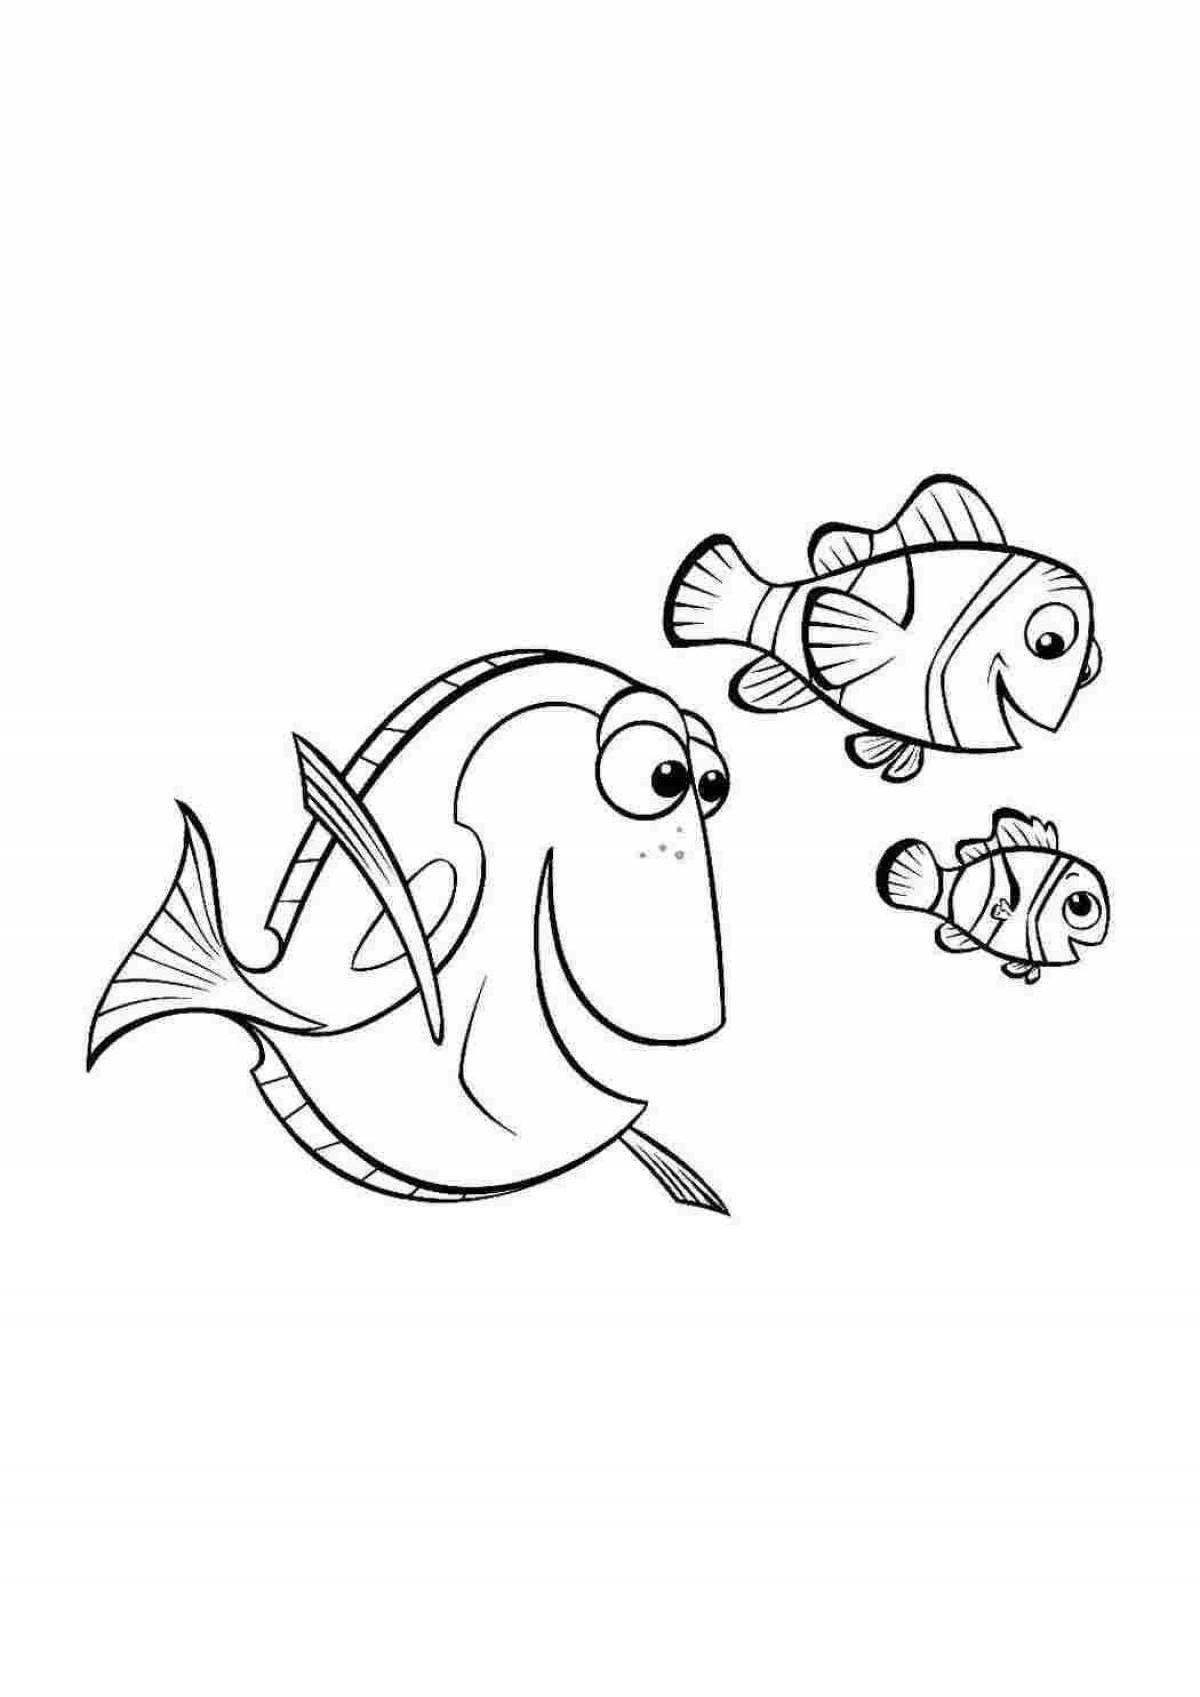 Cute fish coloring for girls